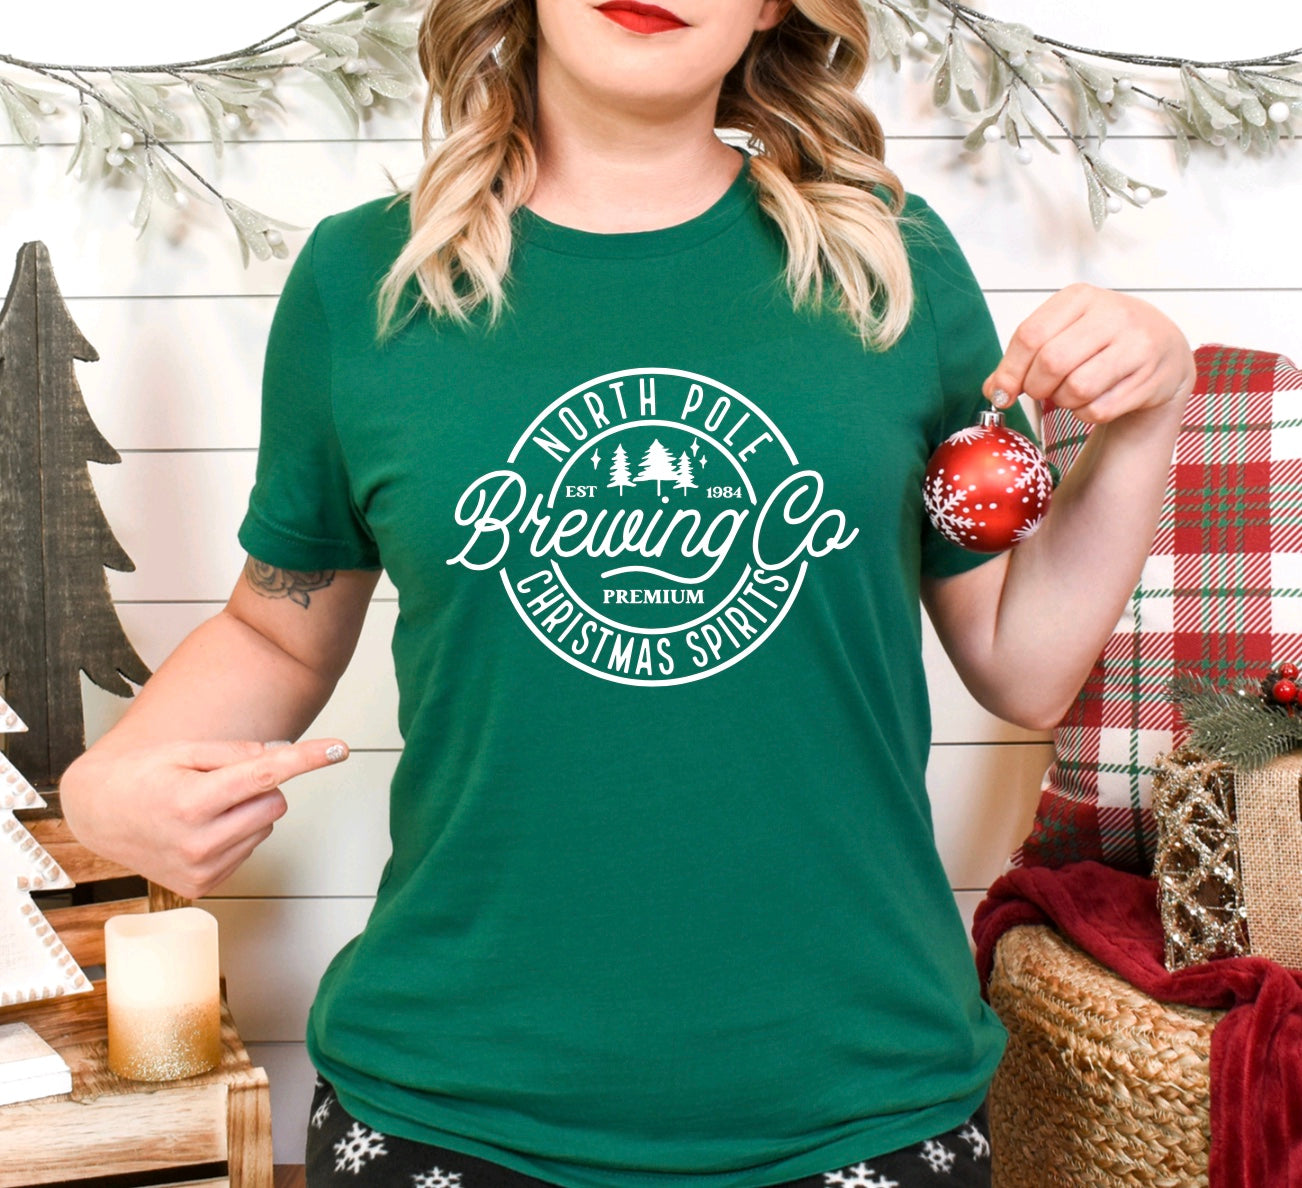 North Pole brewing co Christmas unisex t-shirt in green